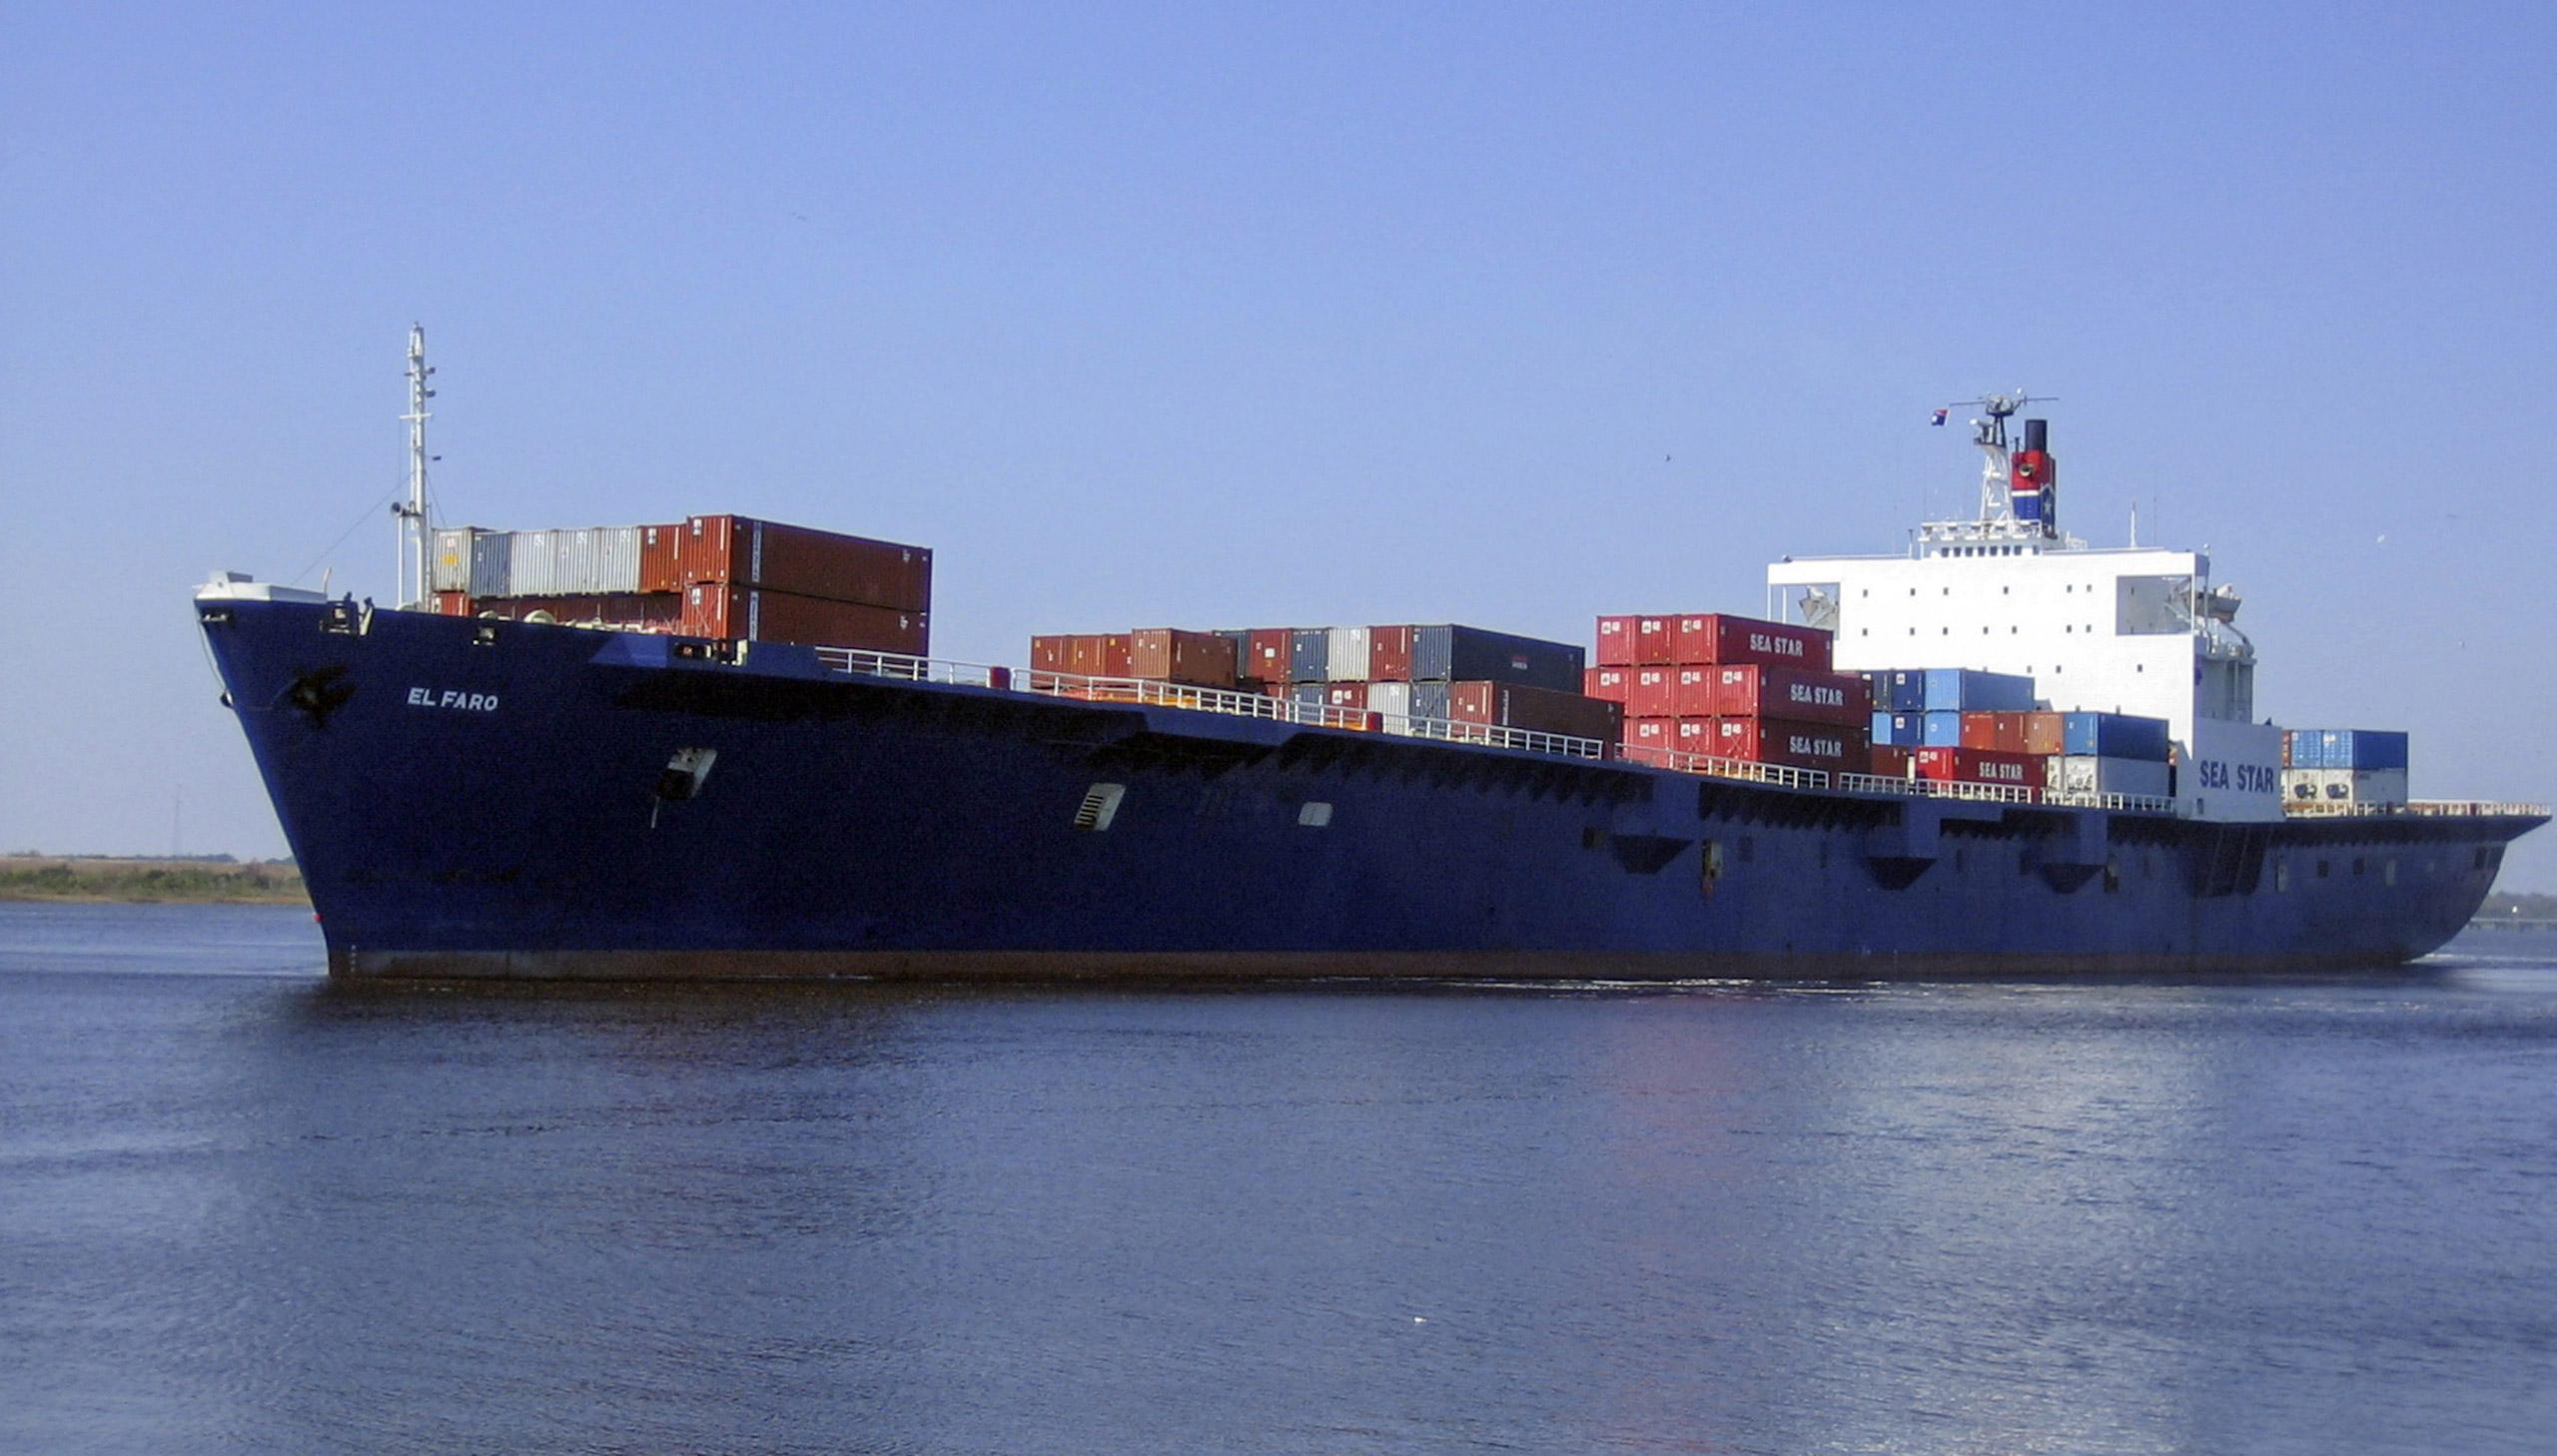 epa05005567 (FILE) An undated handout file picture made available by TOTE Maritime shows the cargo ship El Faro at sea. A search team found what it said was the wreck of a cargo ship that sank in last month's Hurricane Joaquin with the loss of 33 crew members, a US official said on 31 October 2015. 'The vessel was located at a depth of about 15,000 feet (4,500 meters) in the vicinity of its last known position,' the National Transportation Safety Board (NTSB) said. A search vessel detected the wreck using sonar on 31 October, and would deploy a remotely operated sub to confirm its identity as early as 01 November, it said. The 224-metre-long El Faro was bound for San Juan, Puerto Rico with a crew of 28 US citizens and five Poles, when last heard from 01 October near the Bahamas, as Joaquin was gaining strength over the archipelago. A full search with up to five planes, a helicopter, three cutters and three tugboats, as well as US Navy and Air Force resources, failed to find the boat after it lost communications.  EPA/TOTE MARITIME  HANDOUT EDITORIAL USE ONLY/NO SALES